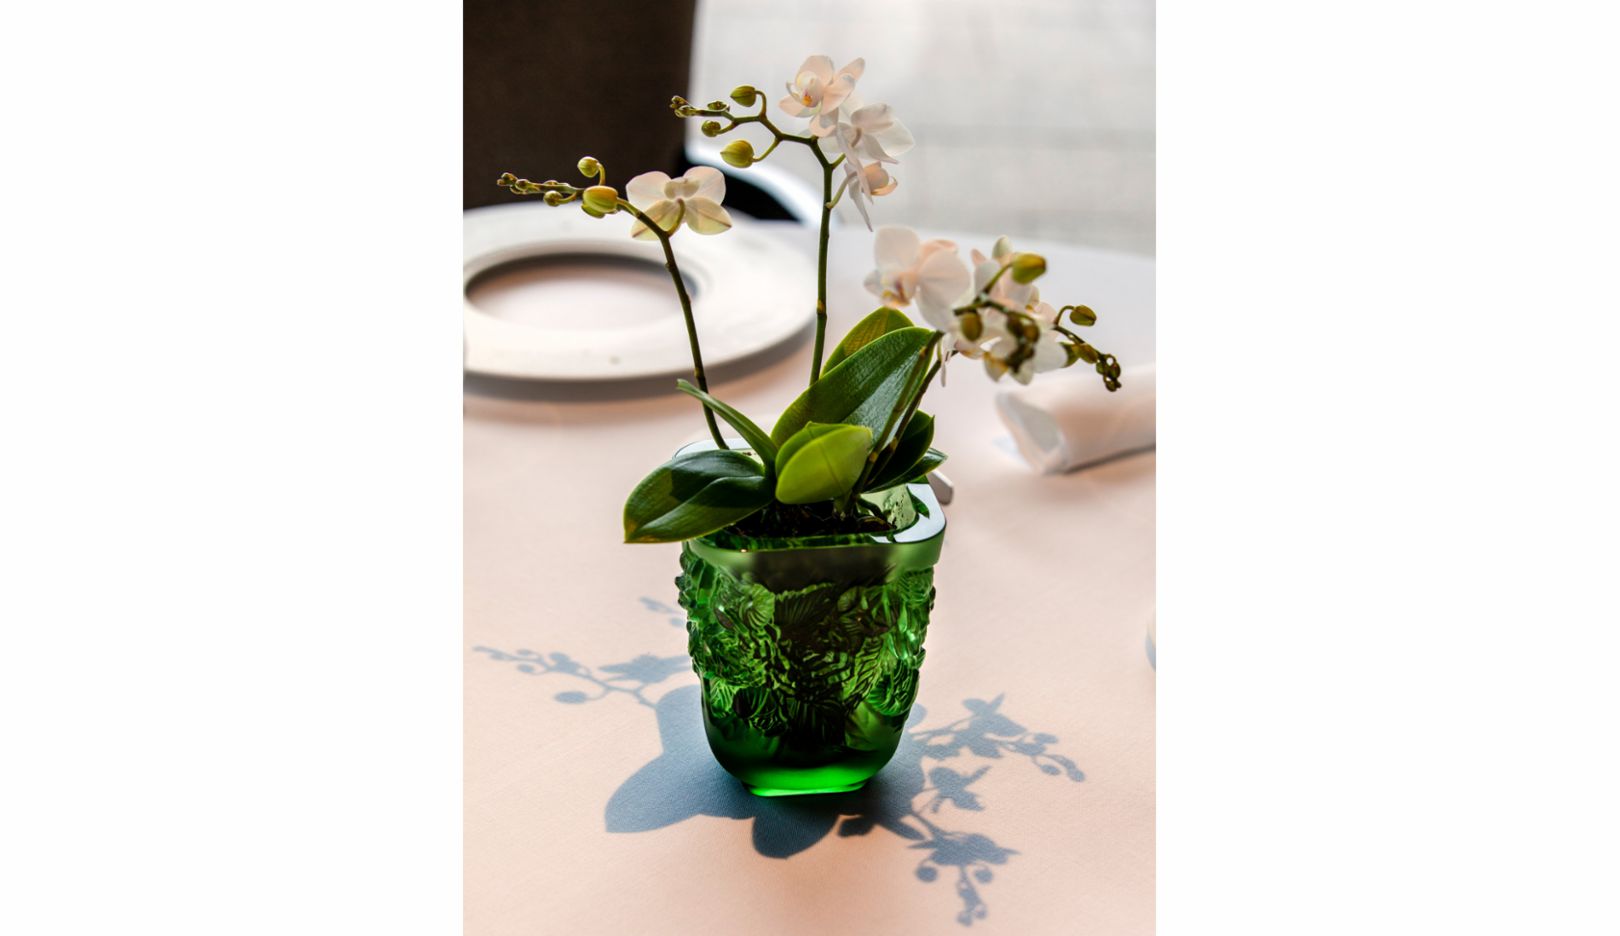 The Lalique repertoire ranges from delicate perfume bottles to crystal sculptures commissioned by artists including Terry Rodgers, Arik Levy and Damien Hirst, as well as furnishings and decorative goods. Here, the Pivoines vase made of green crystal from 2020.